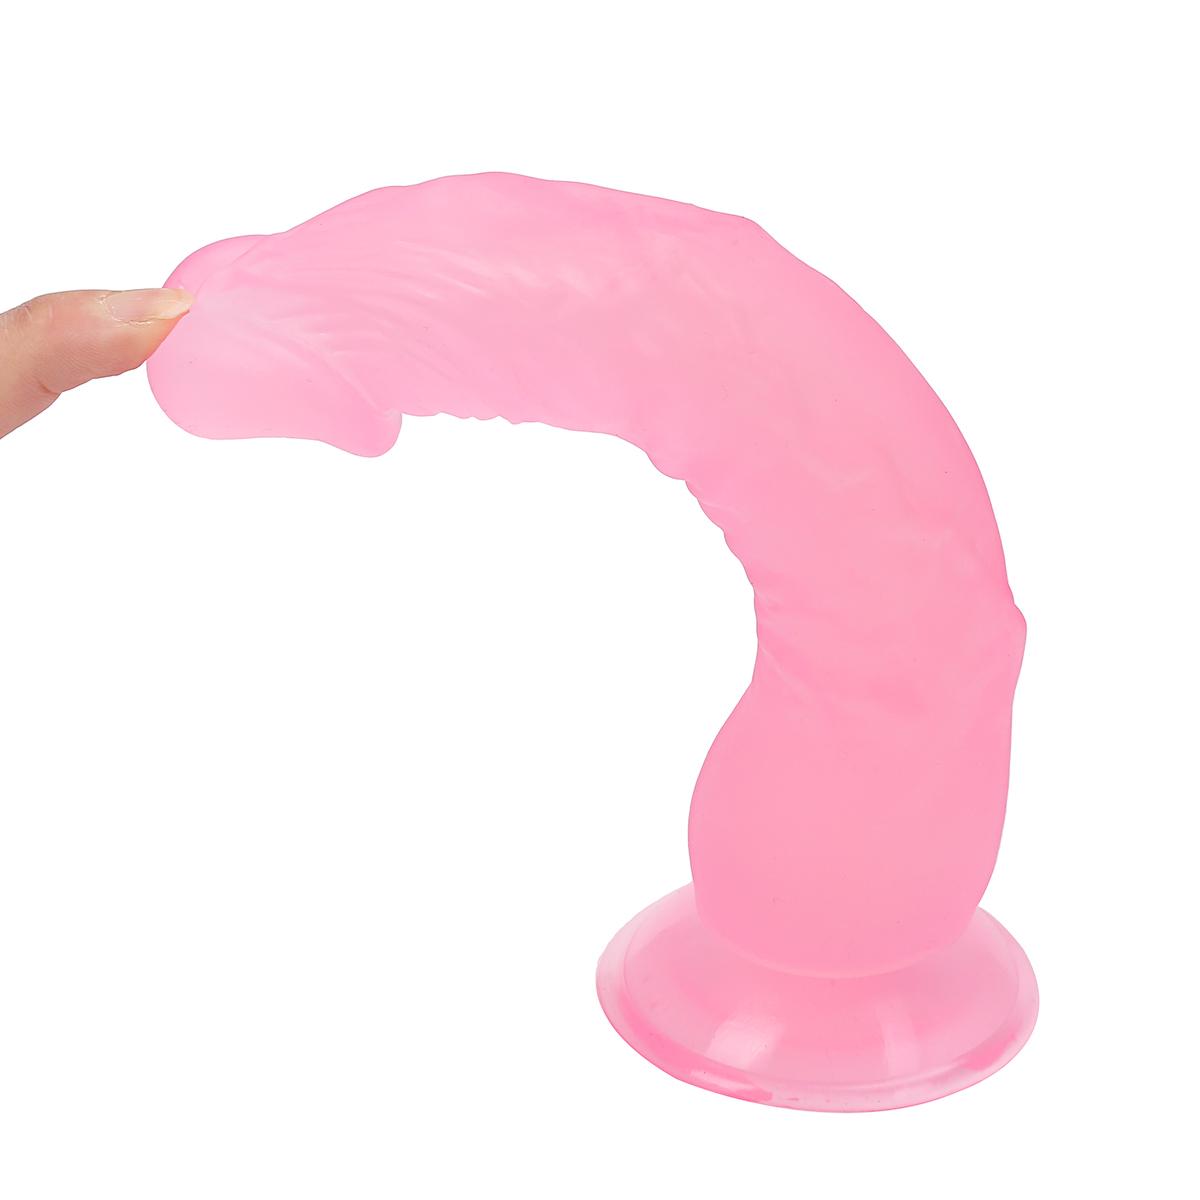 Multicolor simulation small penis for women, masturbation and flirtation suction cups, fake penis, adult sex toy dildo wl254